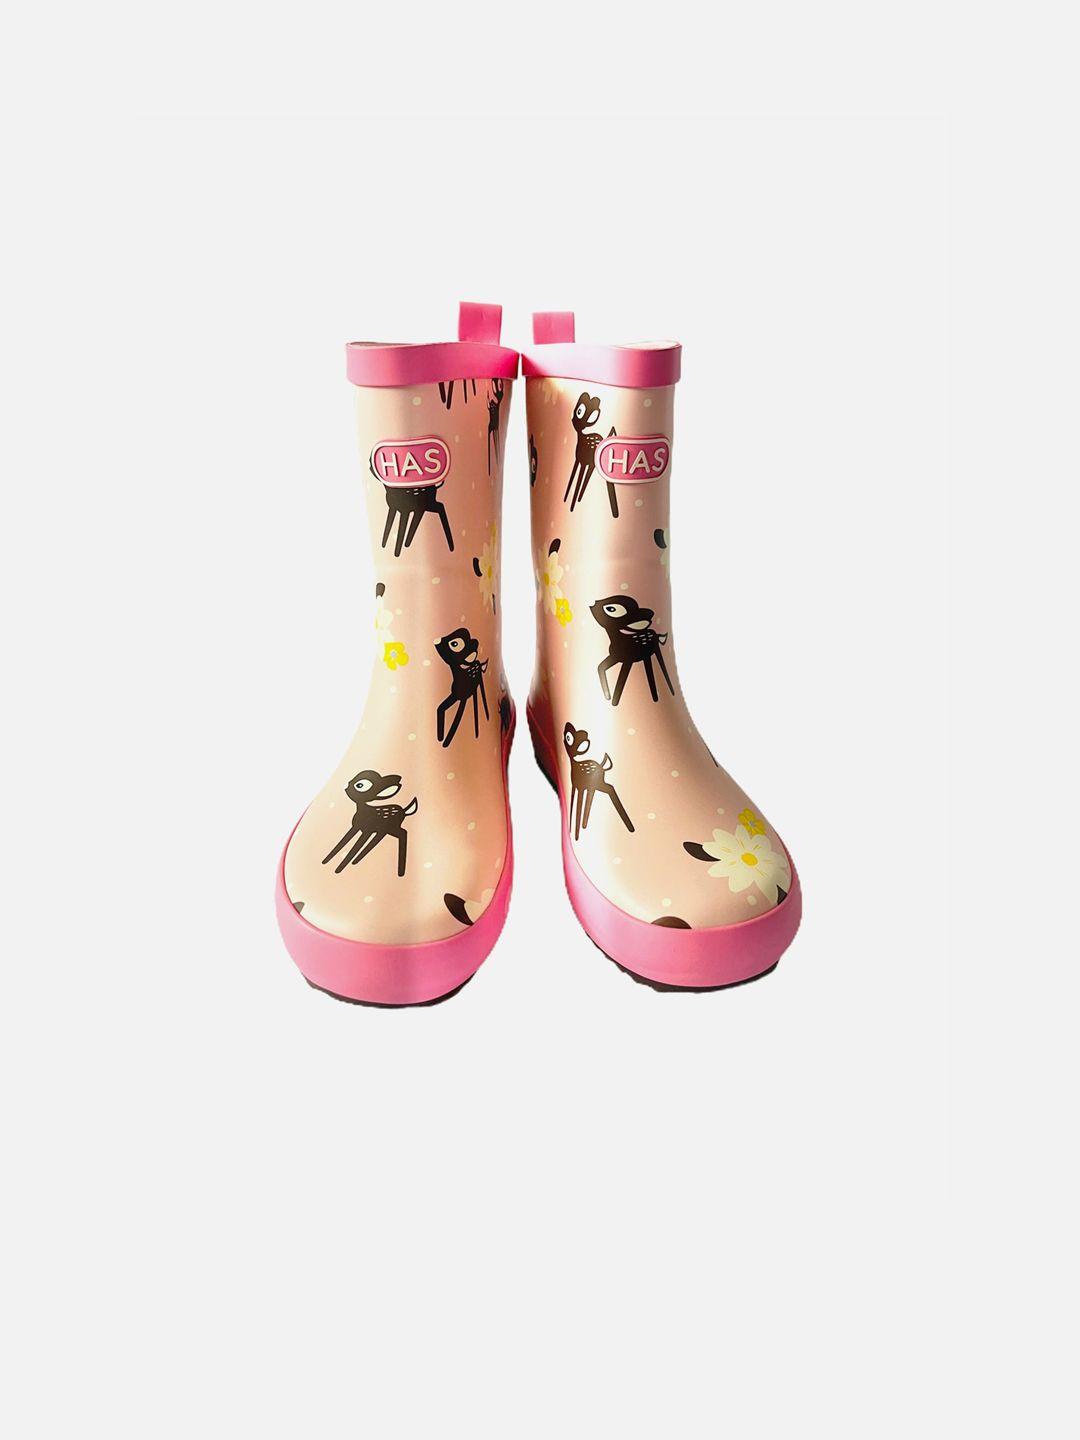 little surprise box llp kids peach colored printed gumboots